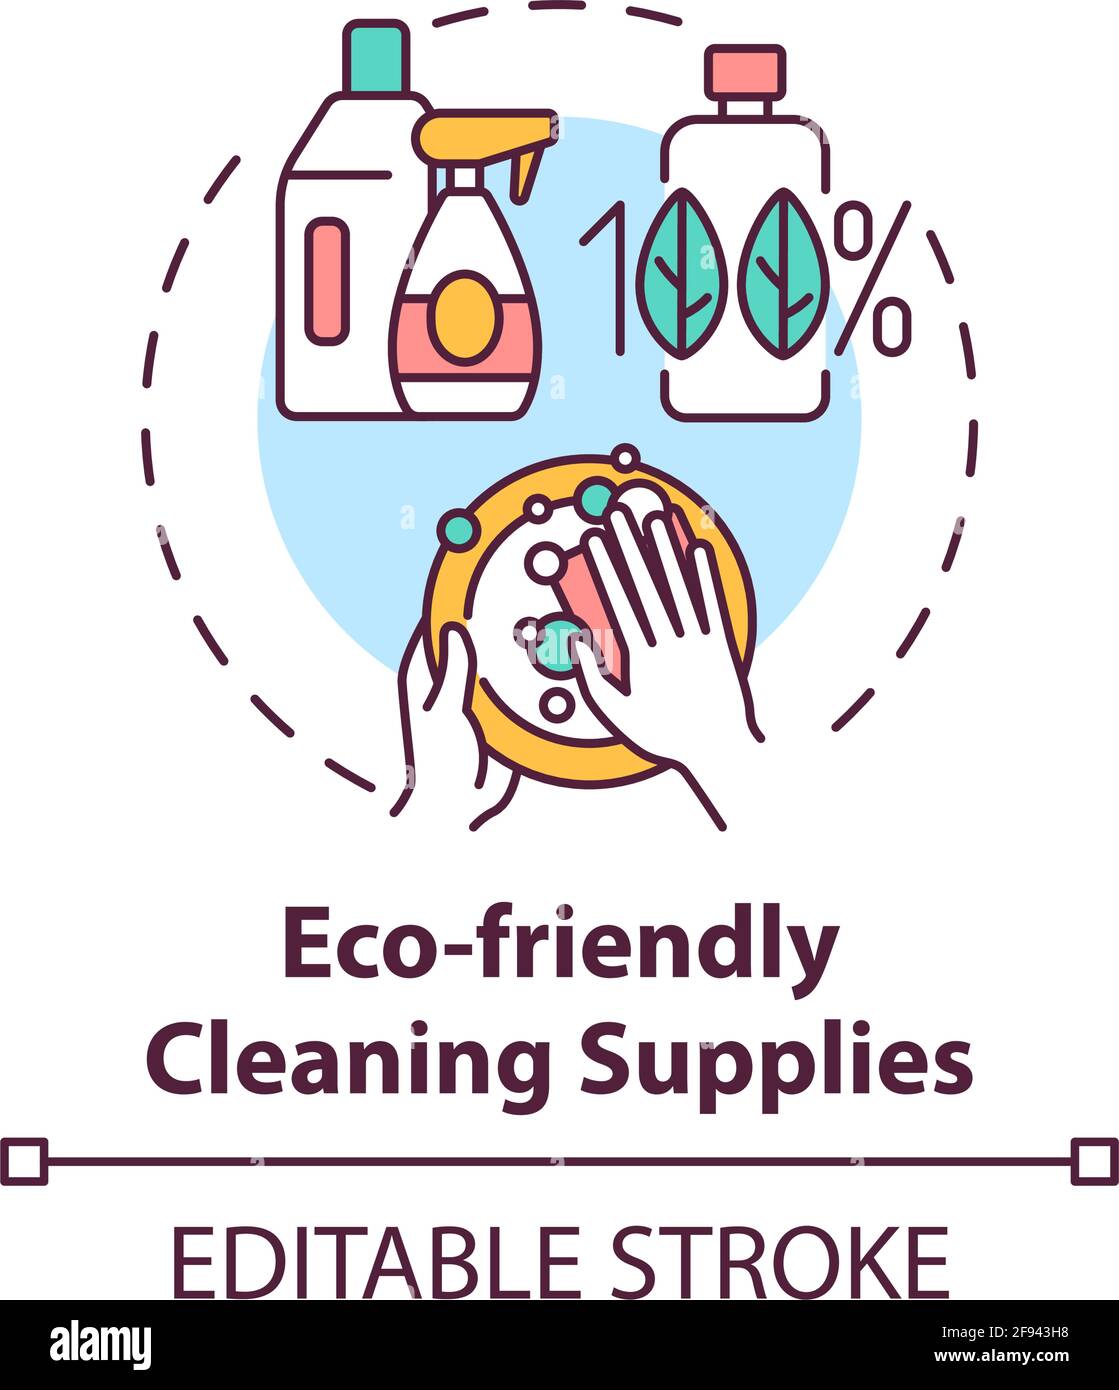 Eco friendly cleaning supplies concept icon Stock Vector